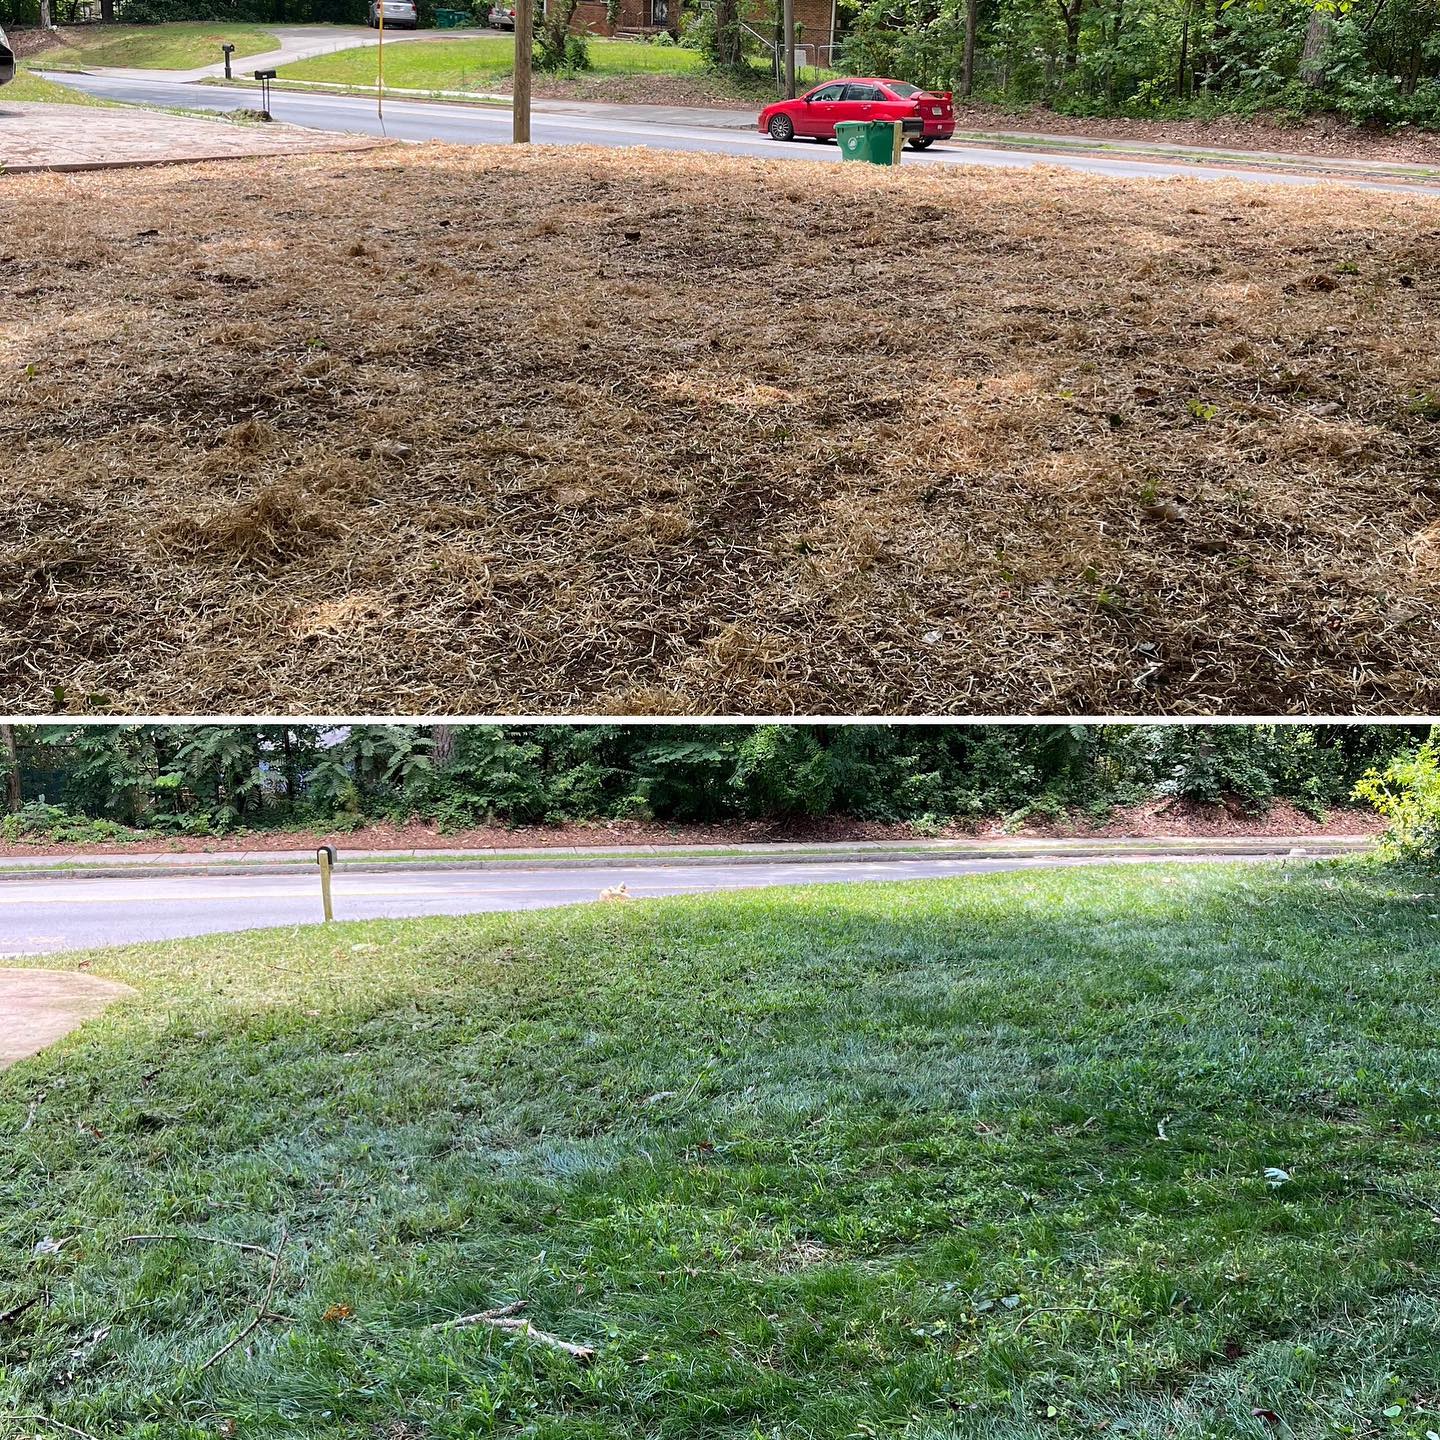 What a little seed will do! New yard by Spencer 🌱
.
.
#landscaping #atlantalandscaper #atlantalandscaping #grass #before